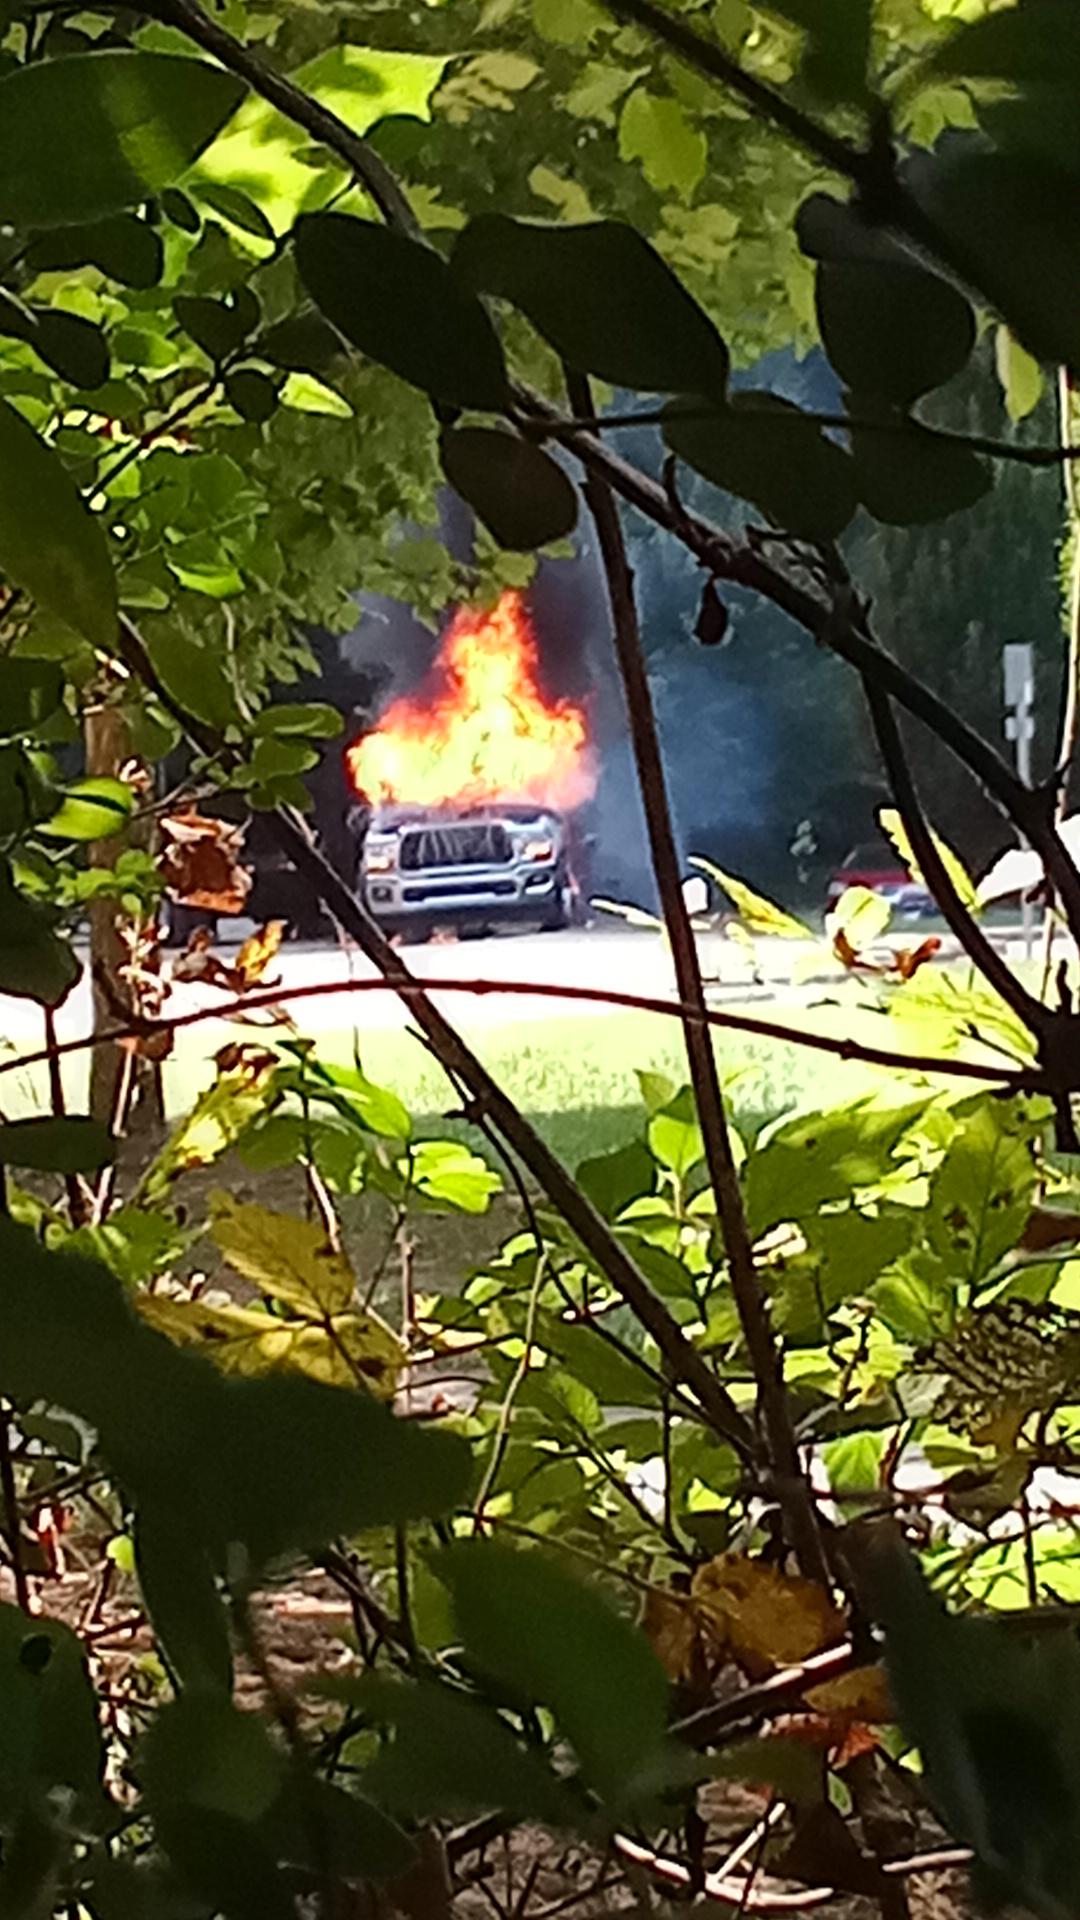 Through the leaves of a tree, a truck is seen burning in a gravel parkng lot.